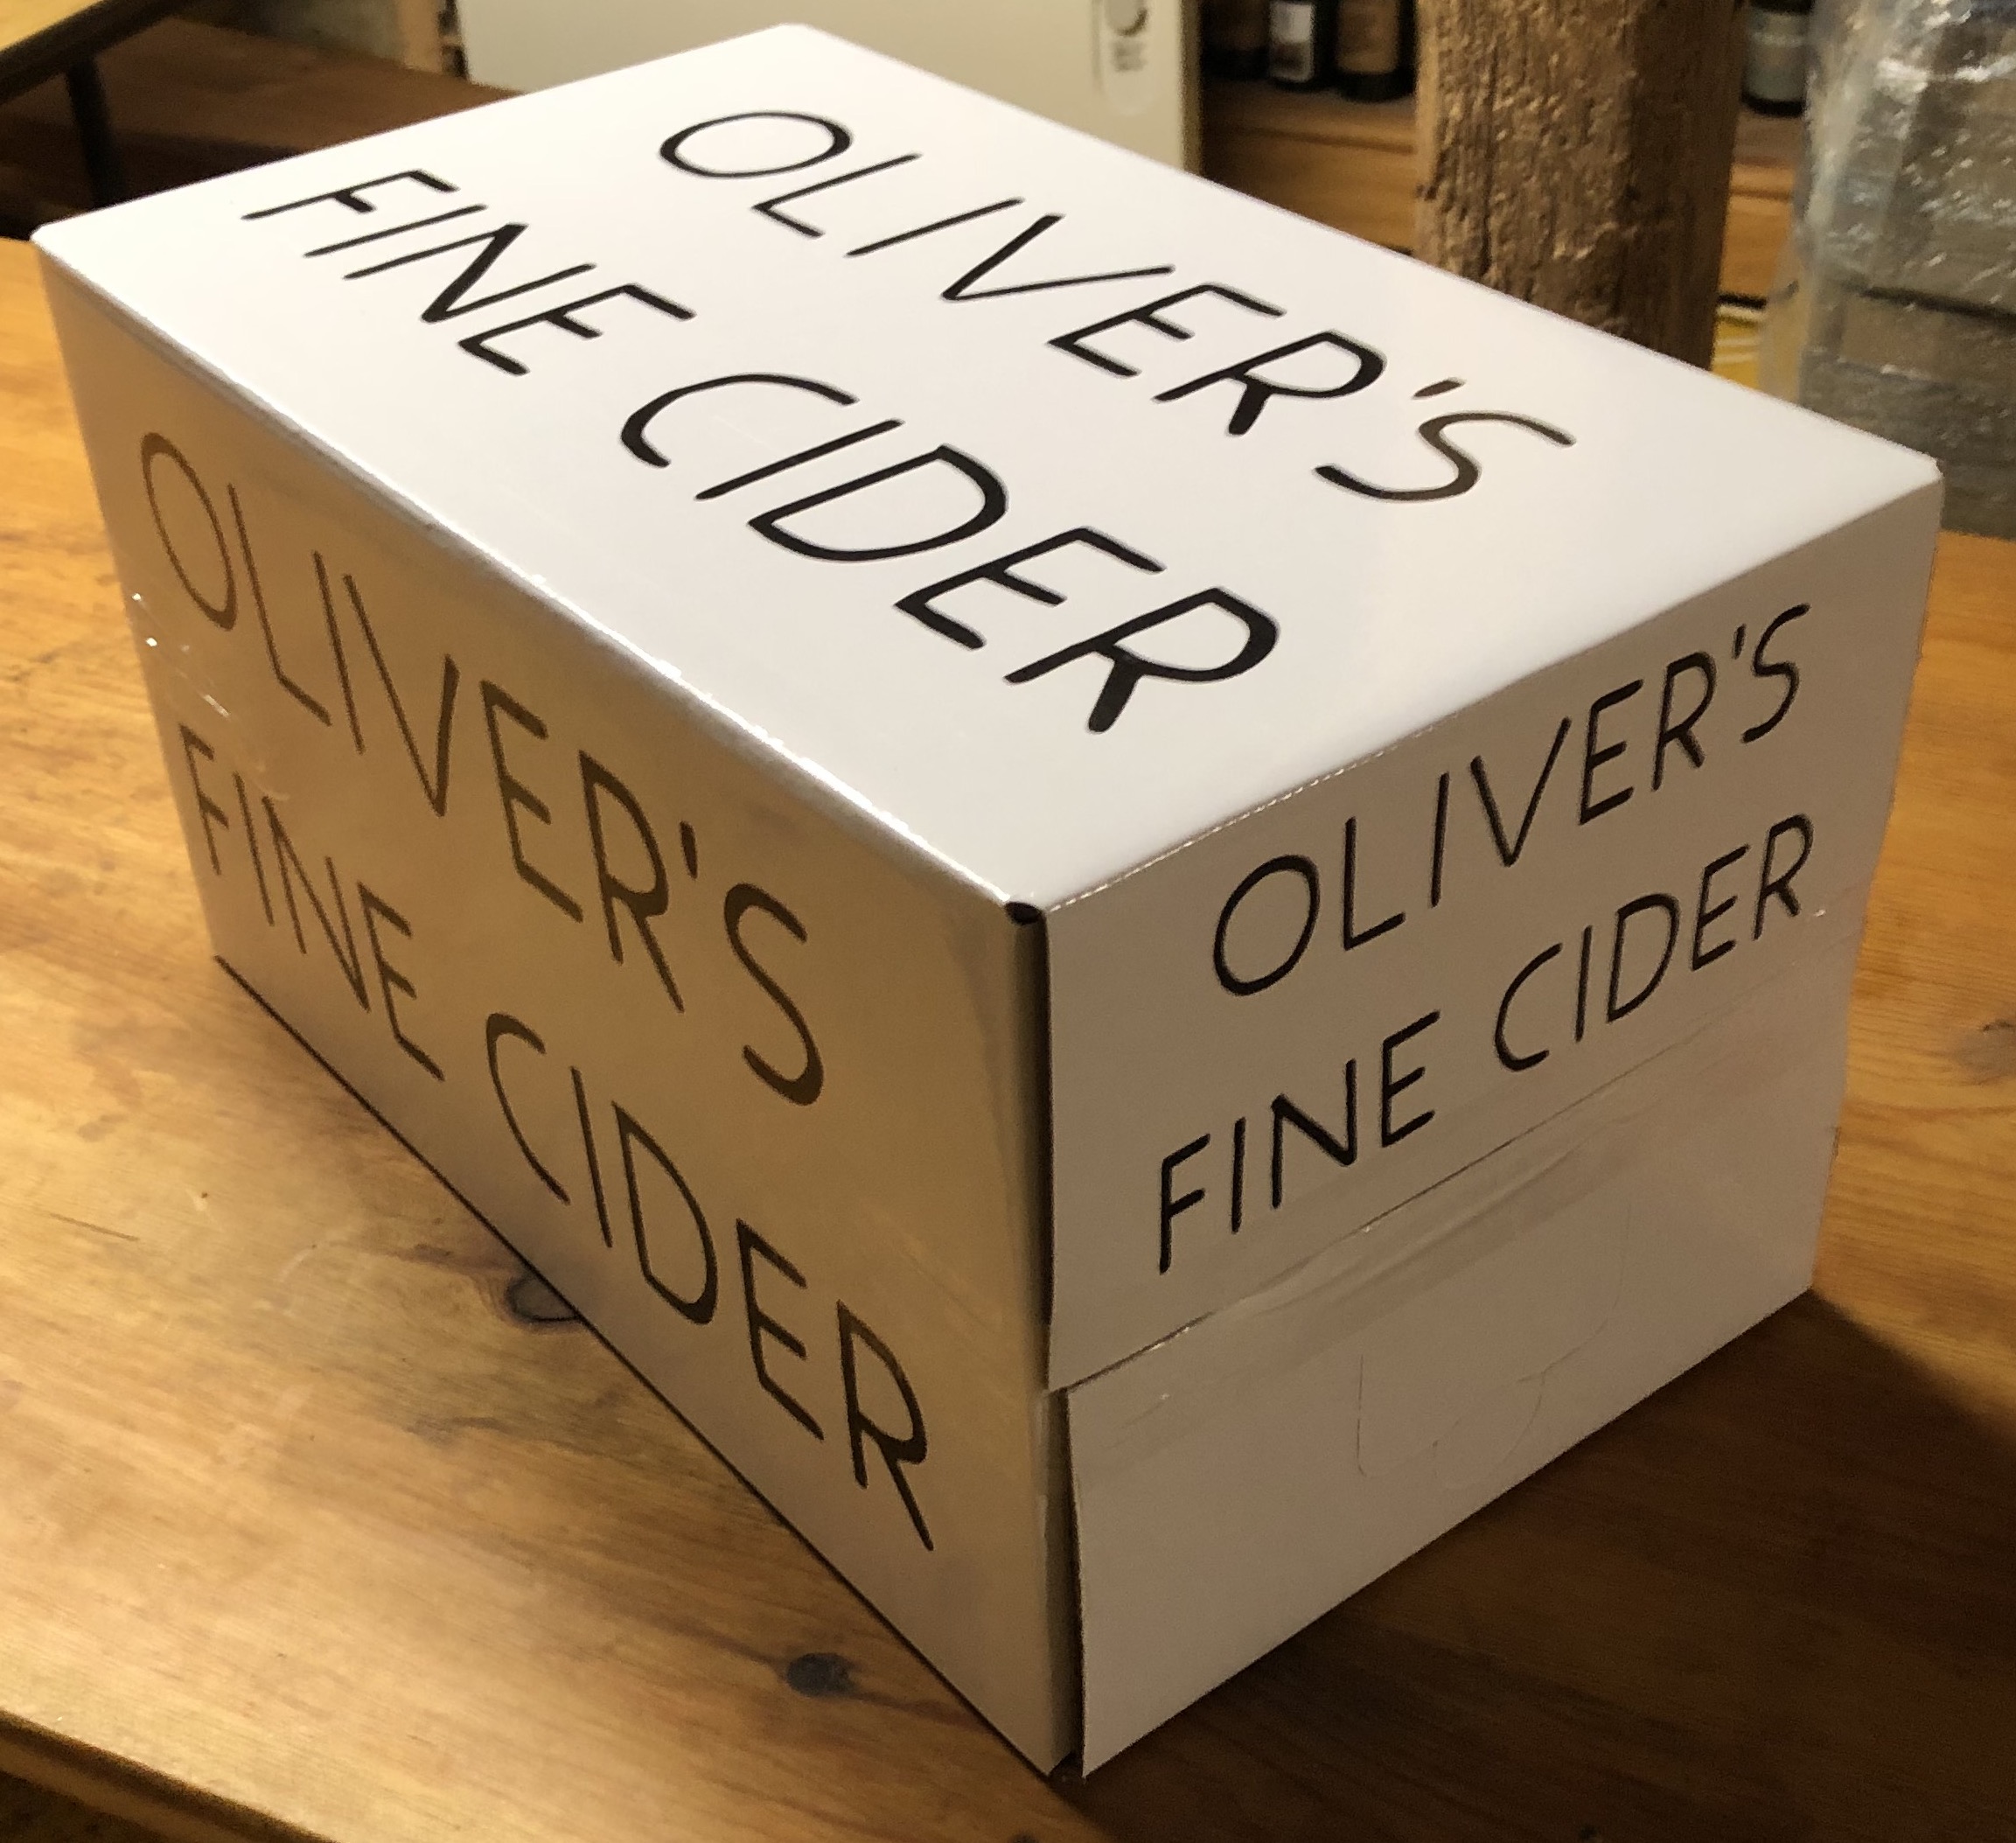 TRADITIONAL DRY DRAUGHT CIDER (20 LITRES) 6.5%